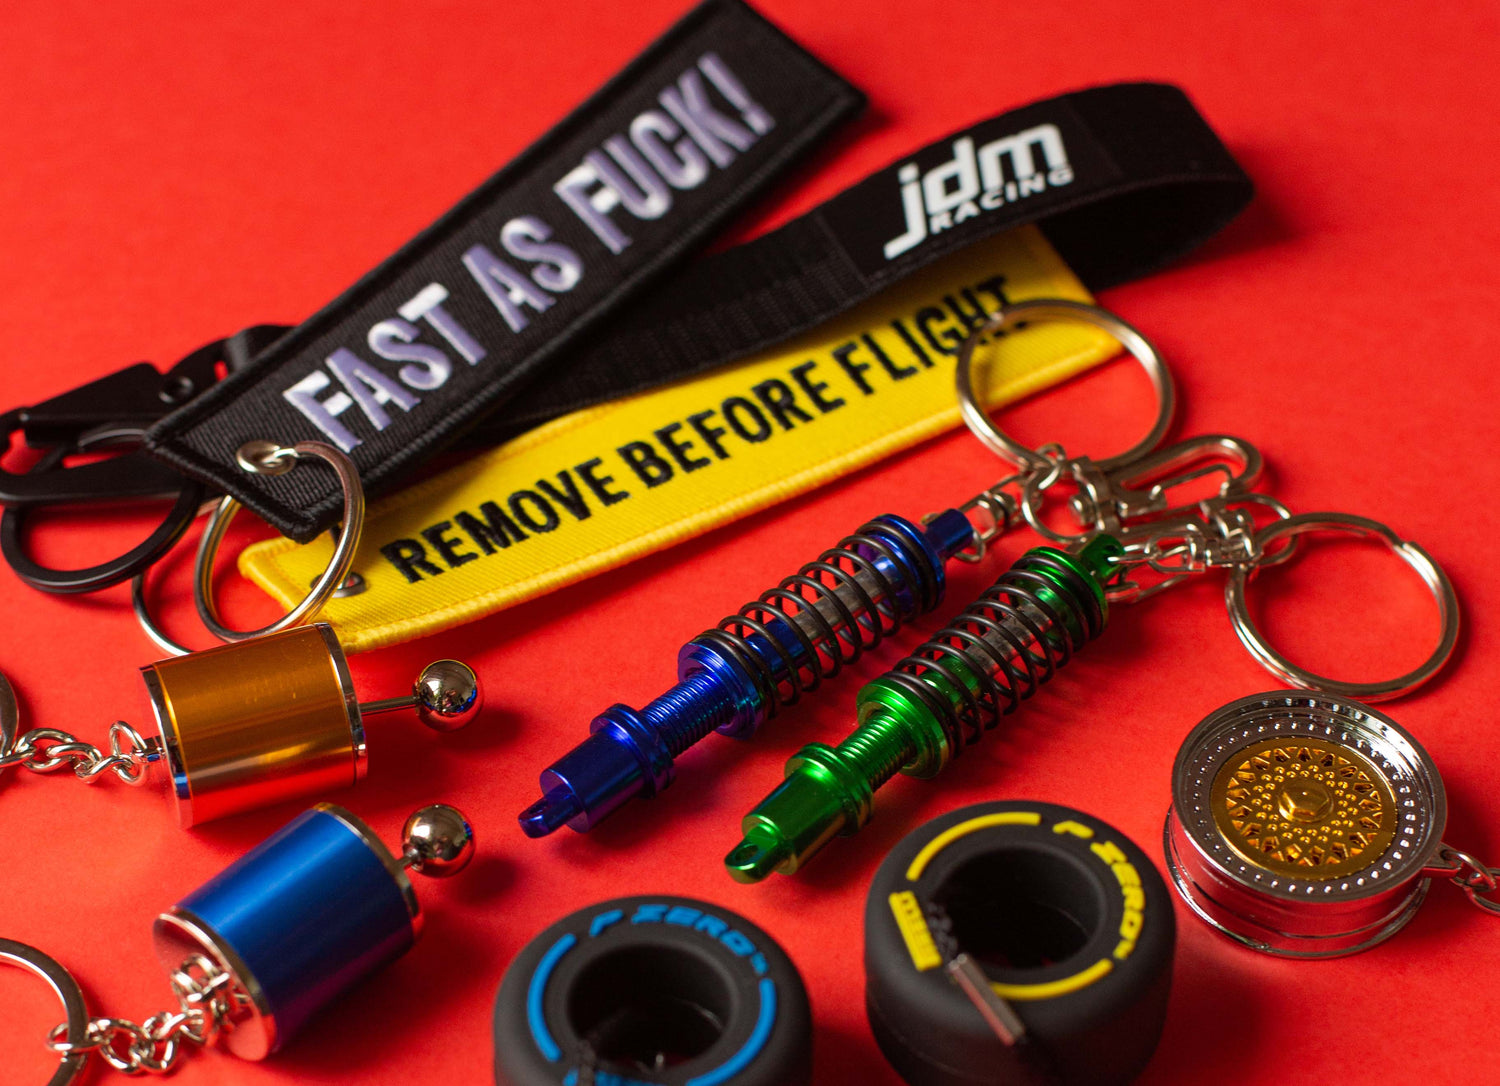 Motorsport keychains and racing gifts